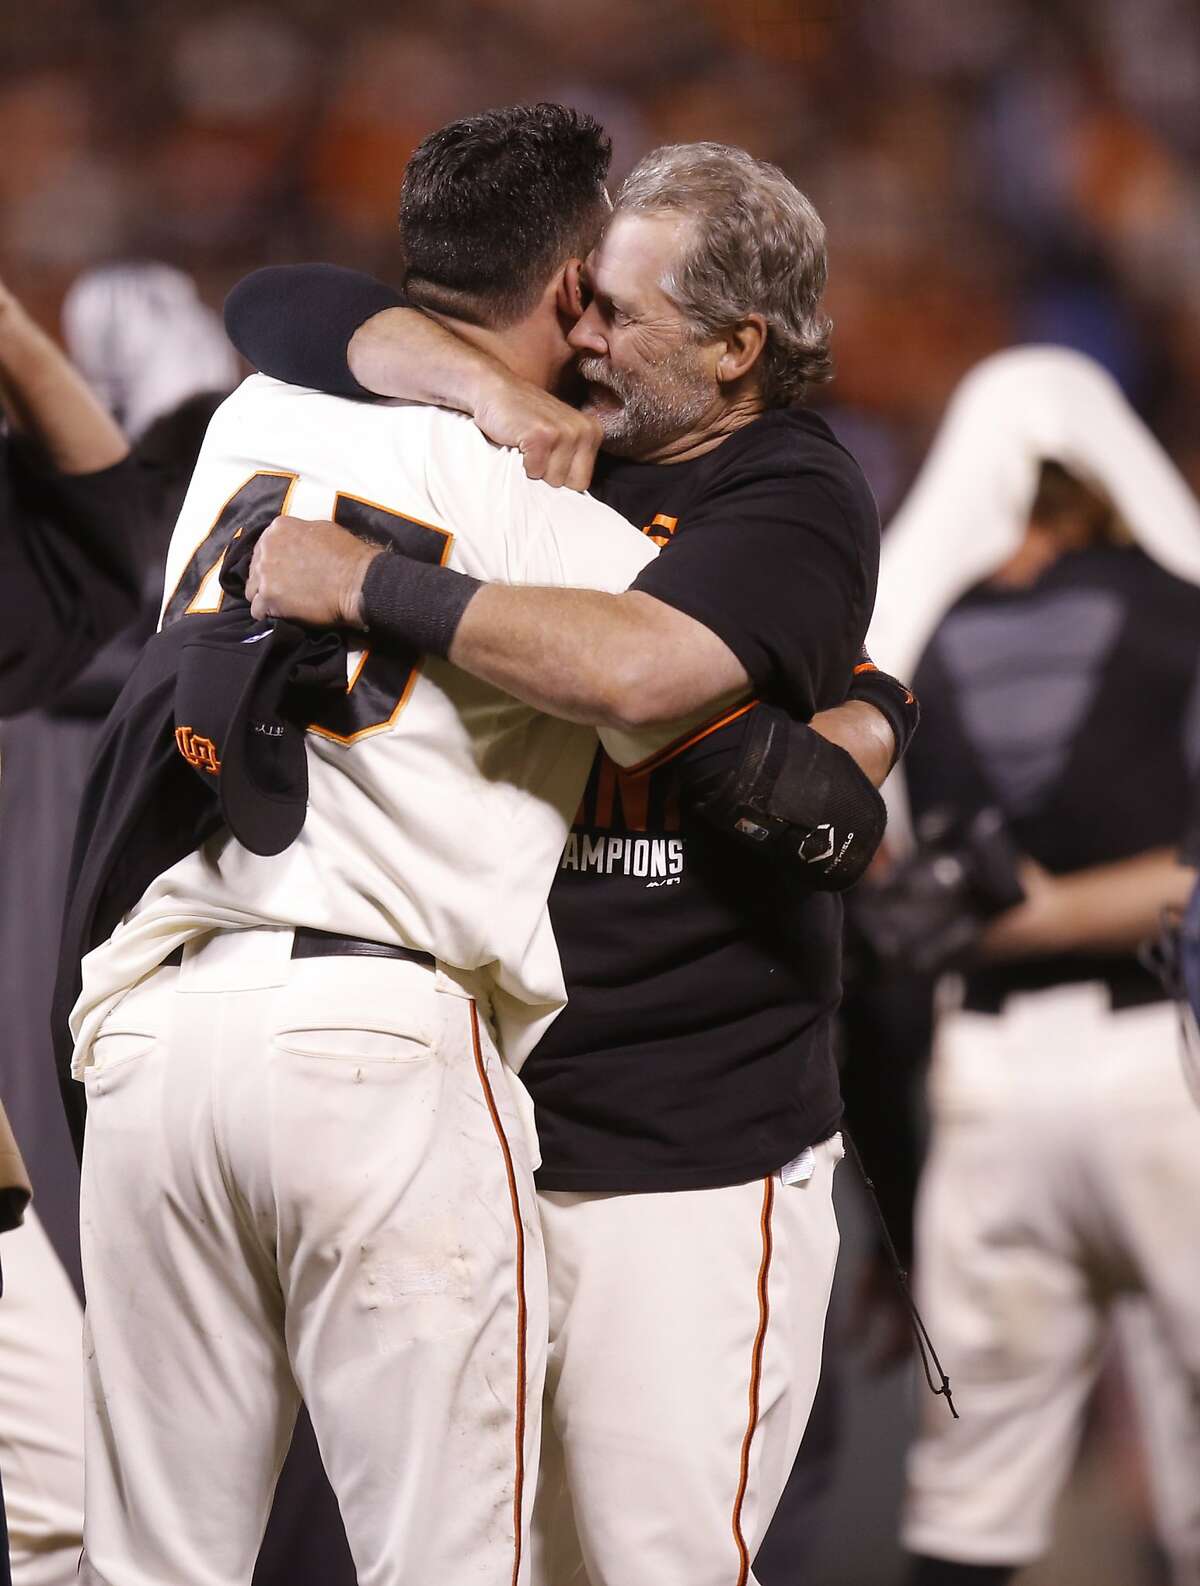 Bullpen catcher Bill Haye embraces Travis Ishikawa after the Giants defeated the Cardinals 6 to 3 in Game 5 of the NLCS at AT&T Park on Thursday, Oct. 16, 2014 in San Francisco, Calif.